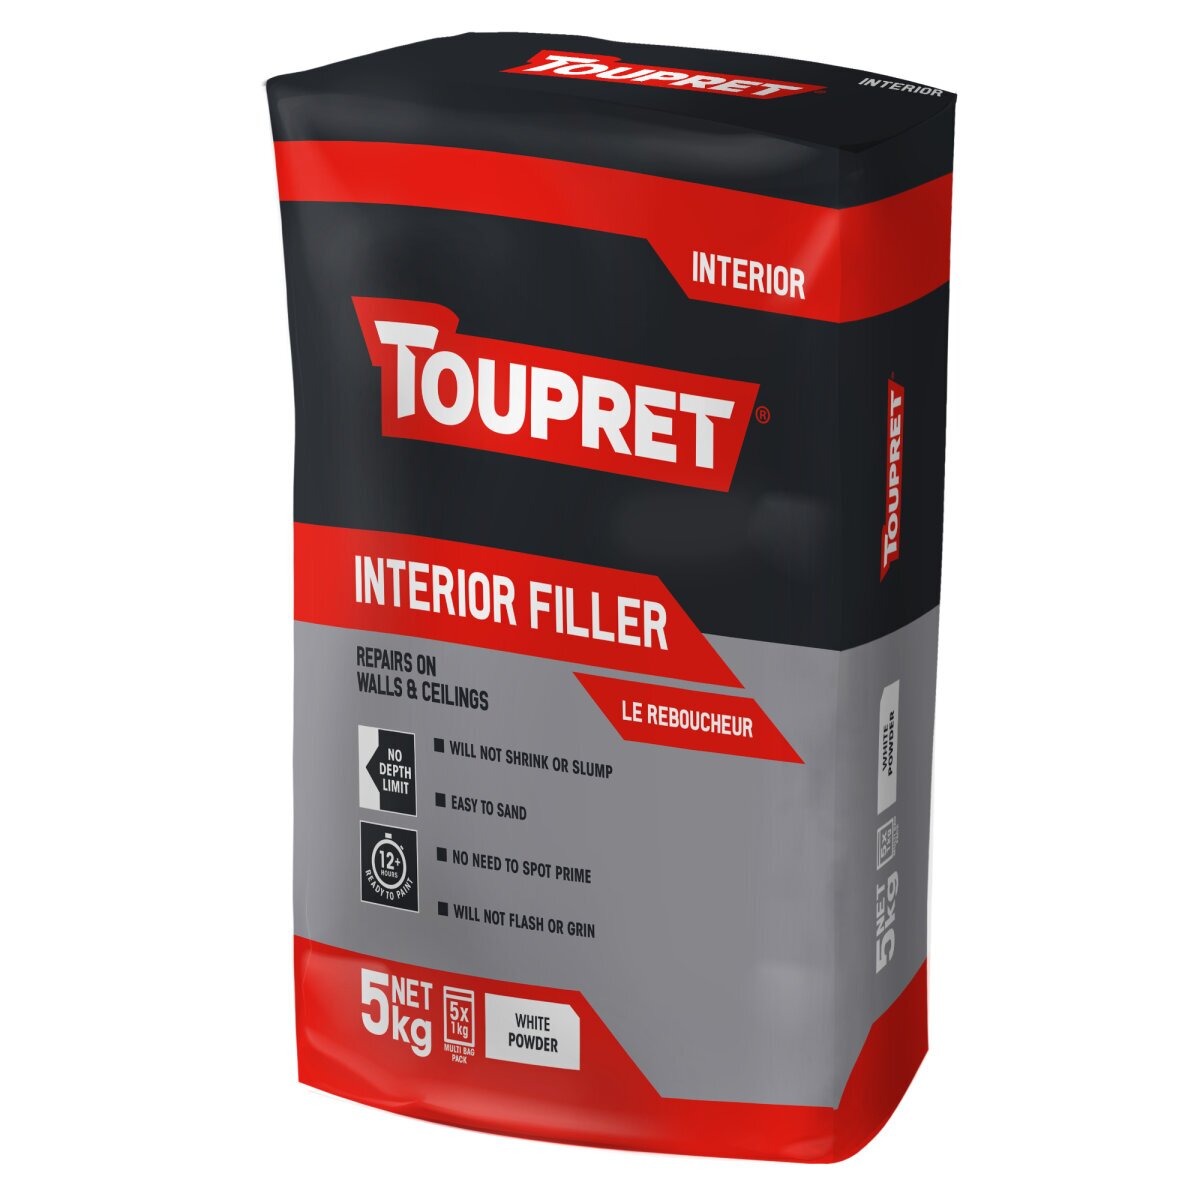 5Kg Toupret Interior Wall and Ceiling Filler